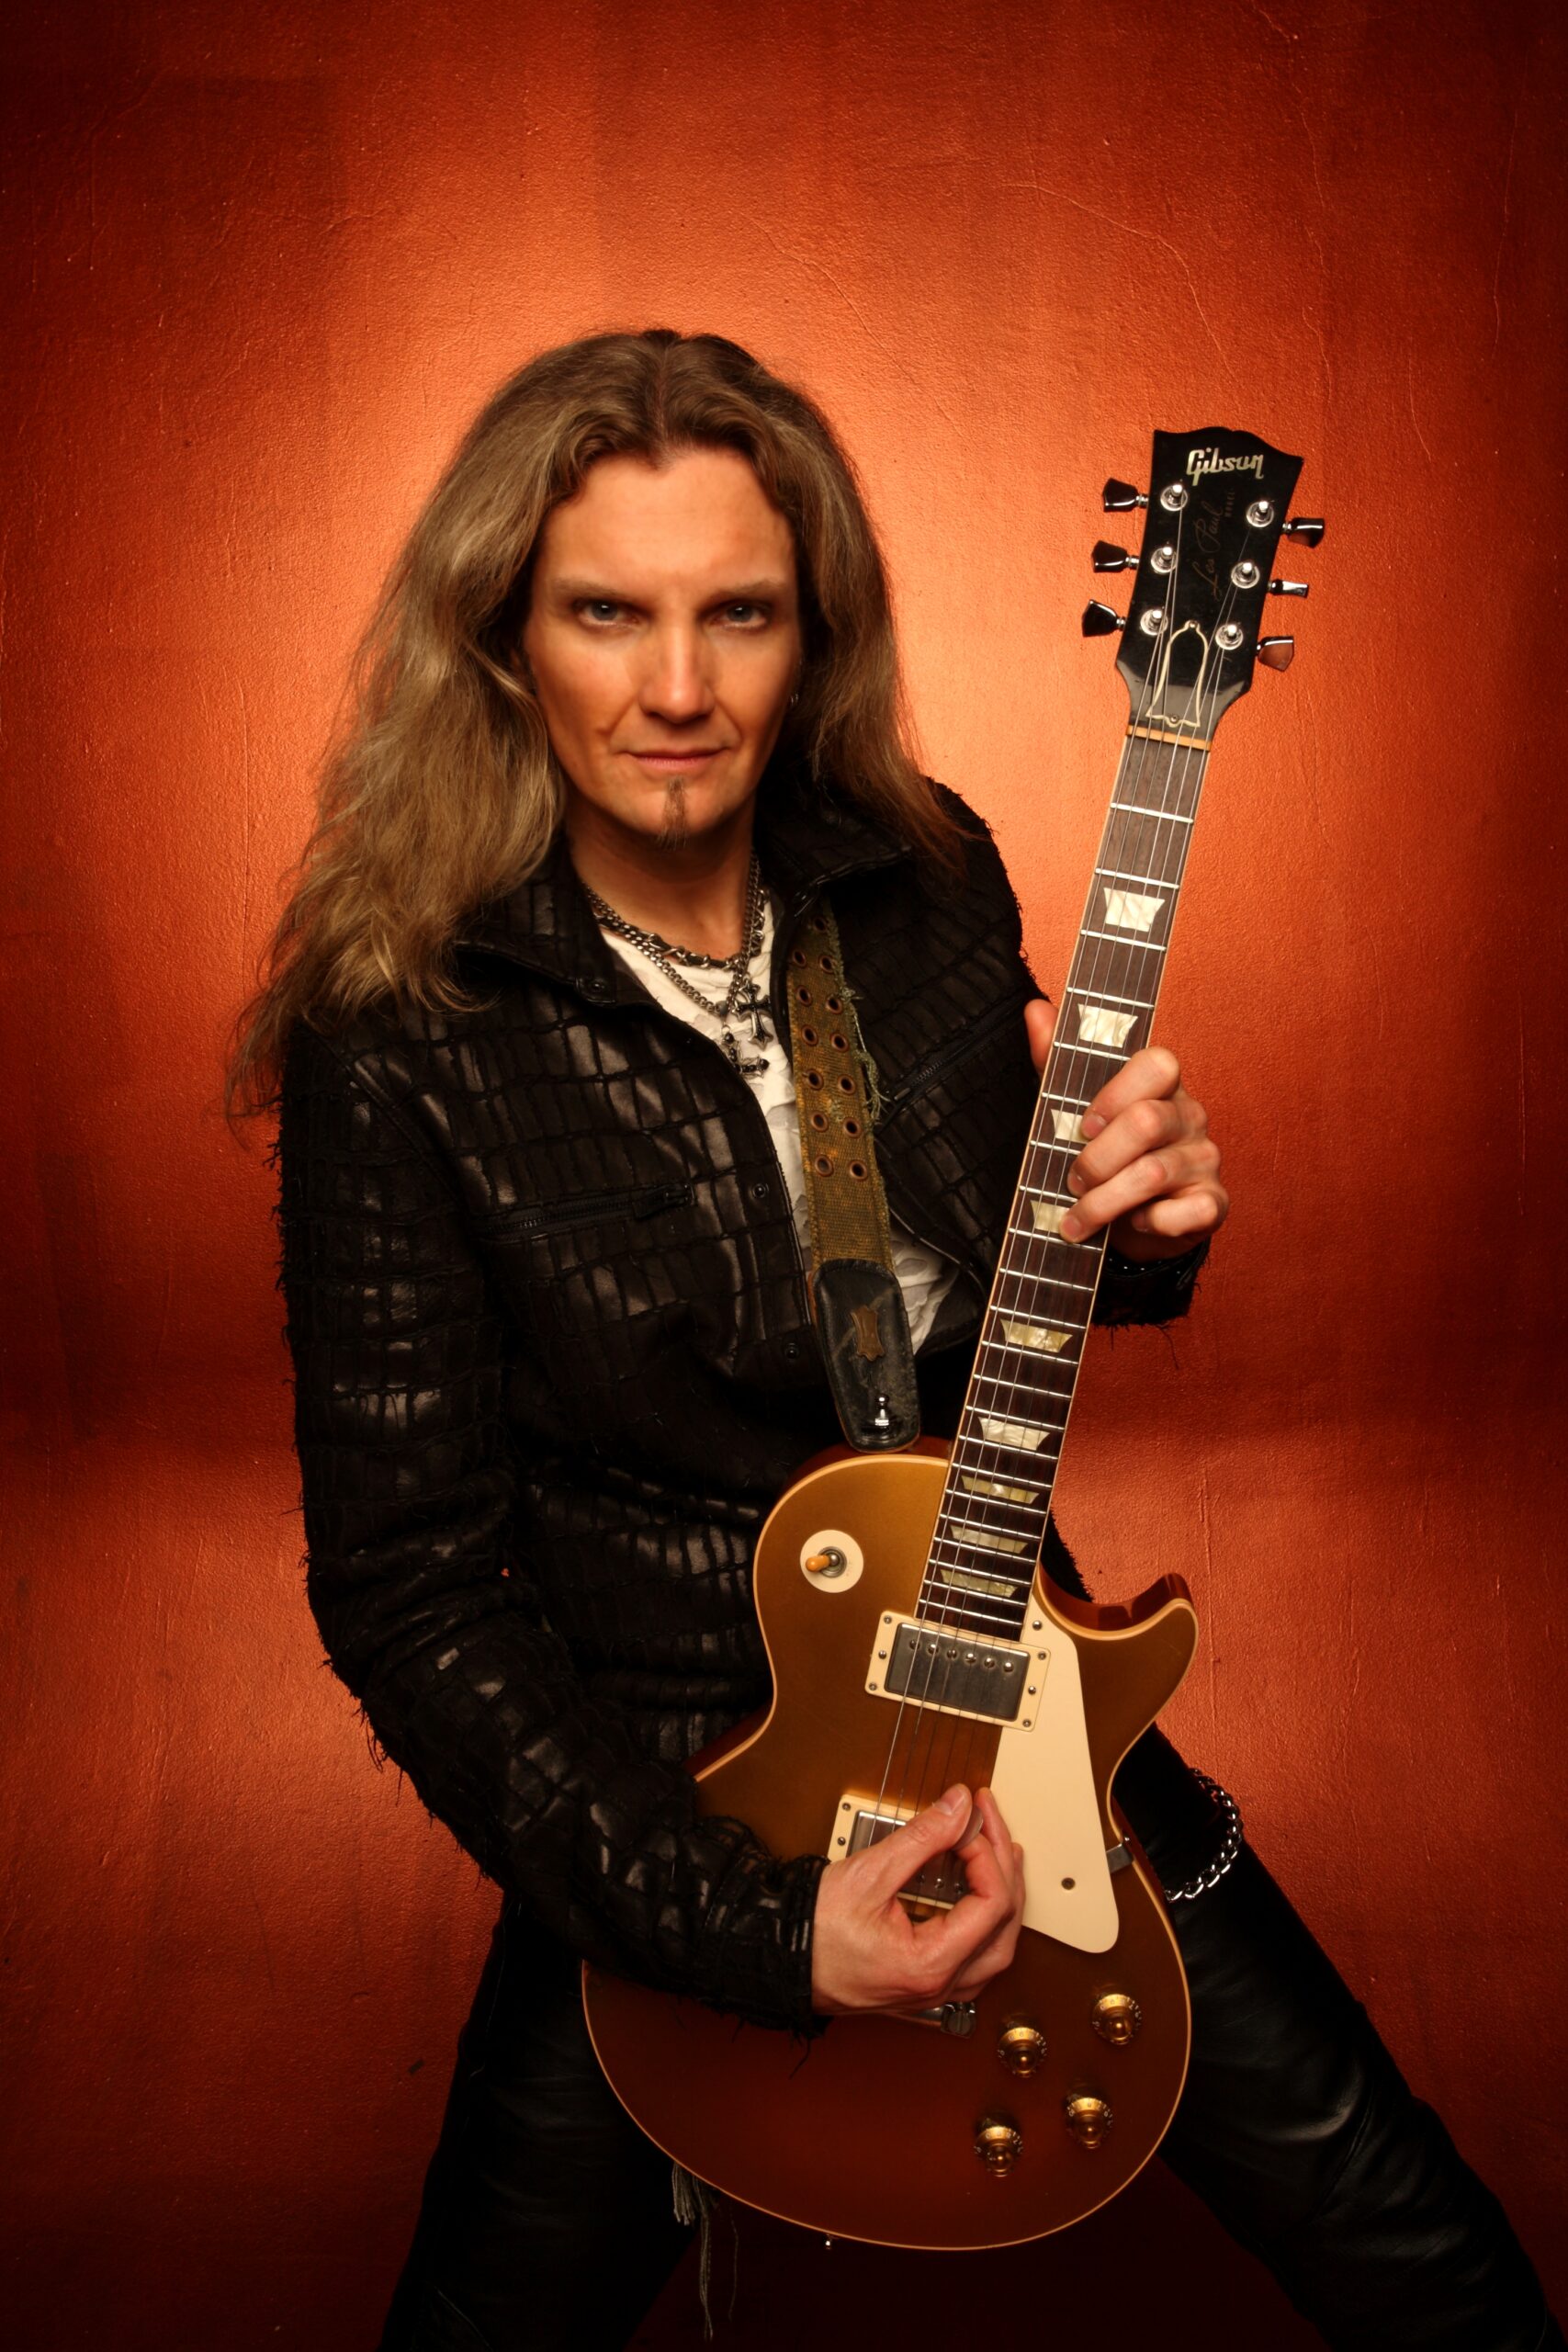 RAIDING THE ROCK VAULT WELCOMES SPECIAL GUEST GUITARIST JOEL HOEKSTRA FROM WHITESNAKE & TRANS SIBERIAN ORCHESTRA